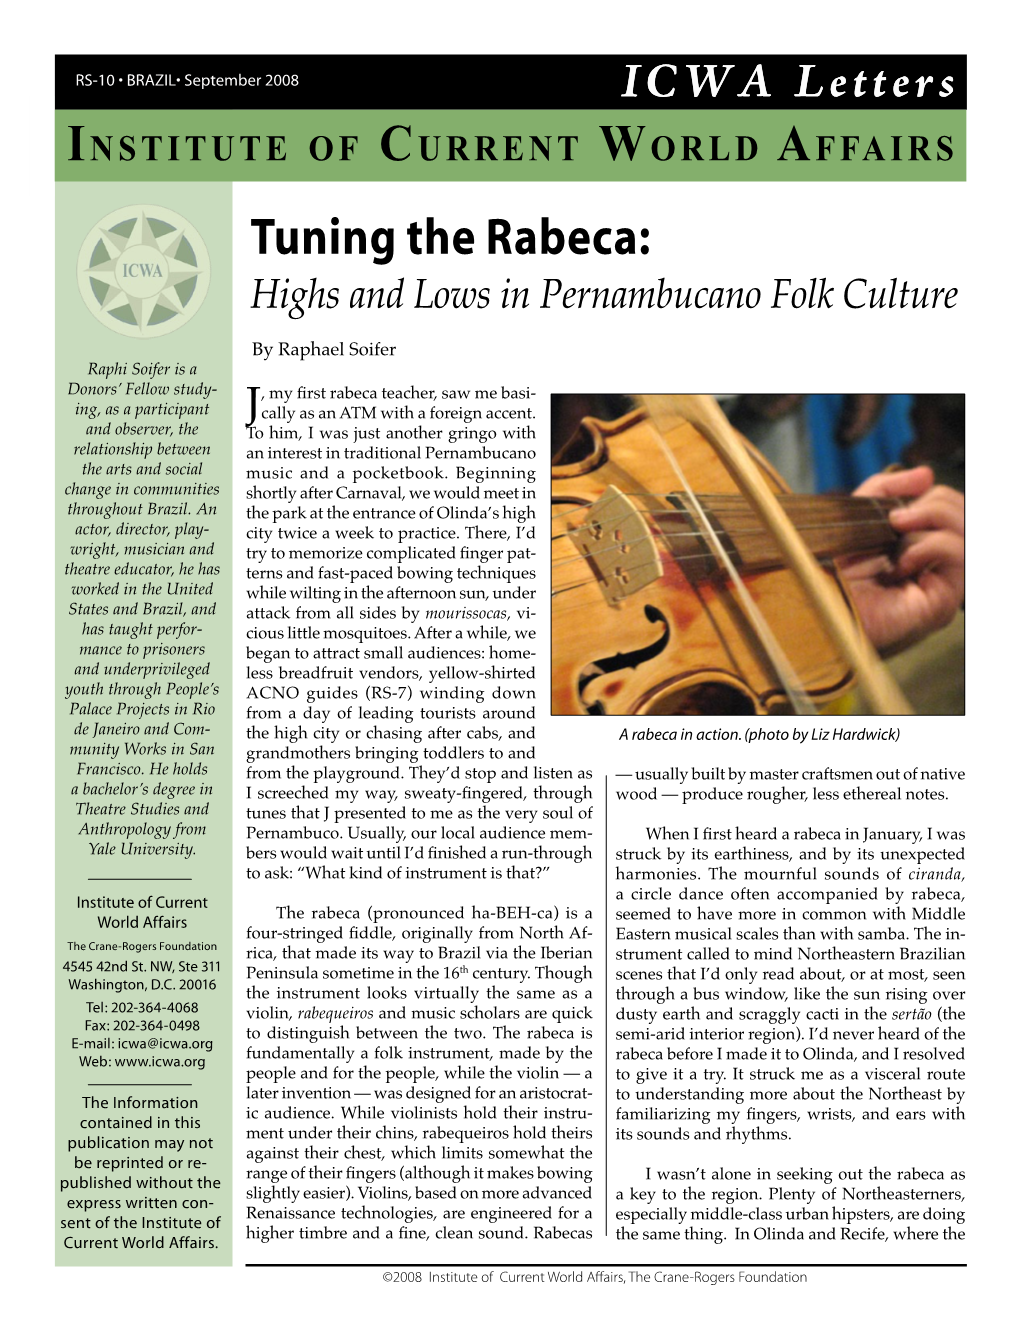 Tuning the Rabeca: Highs and Lows in Pernambucano Folk Culture